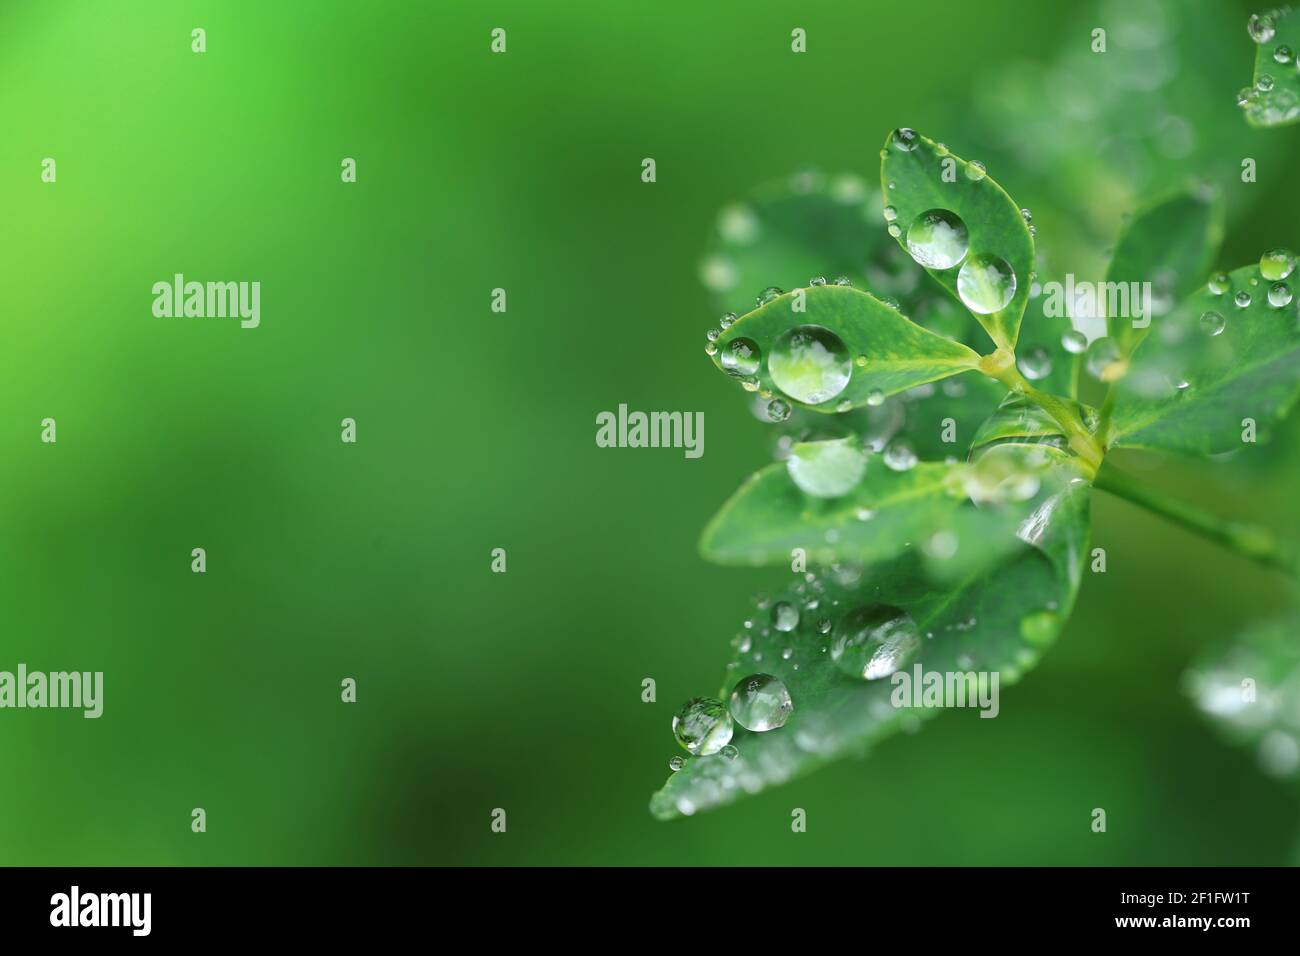 Earth Day. Ecological concept. Green leaves with water drops on blurred bright green background.Beautiful nature background.Green plants  Stock Photo